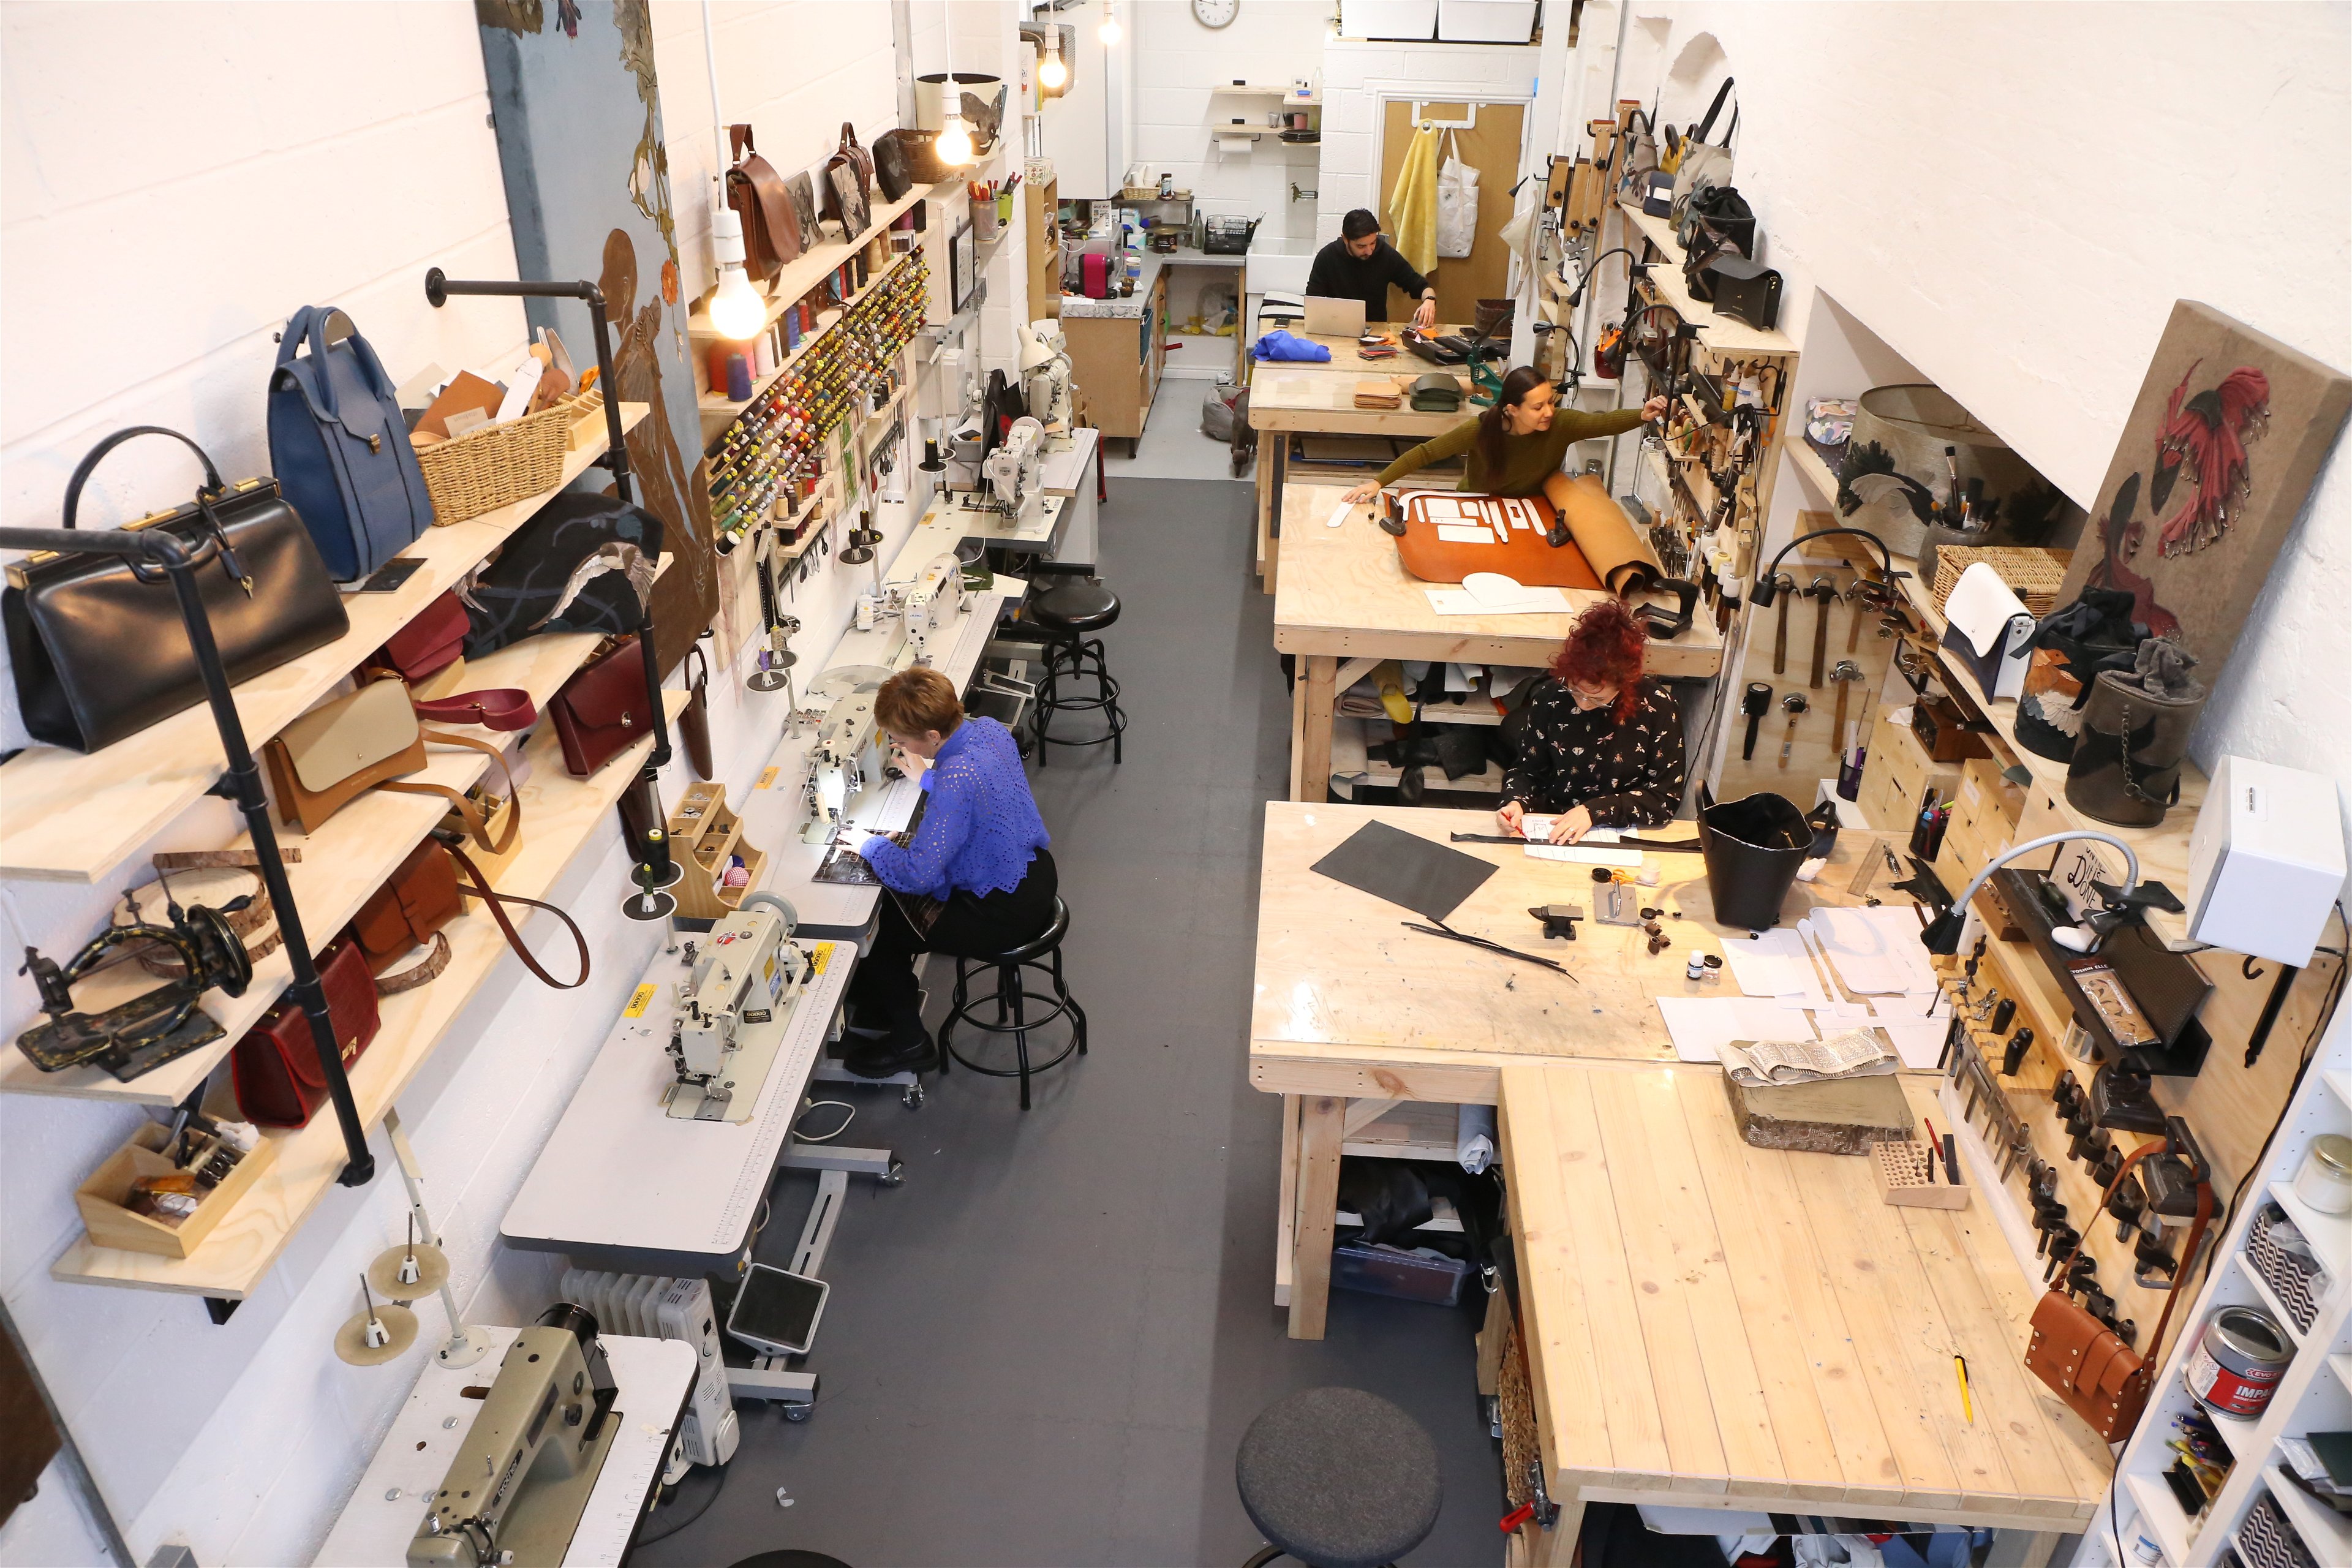 The London Leather Workshop